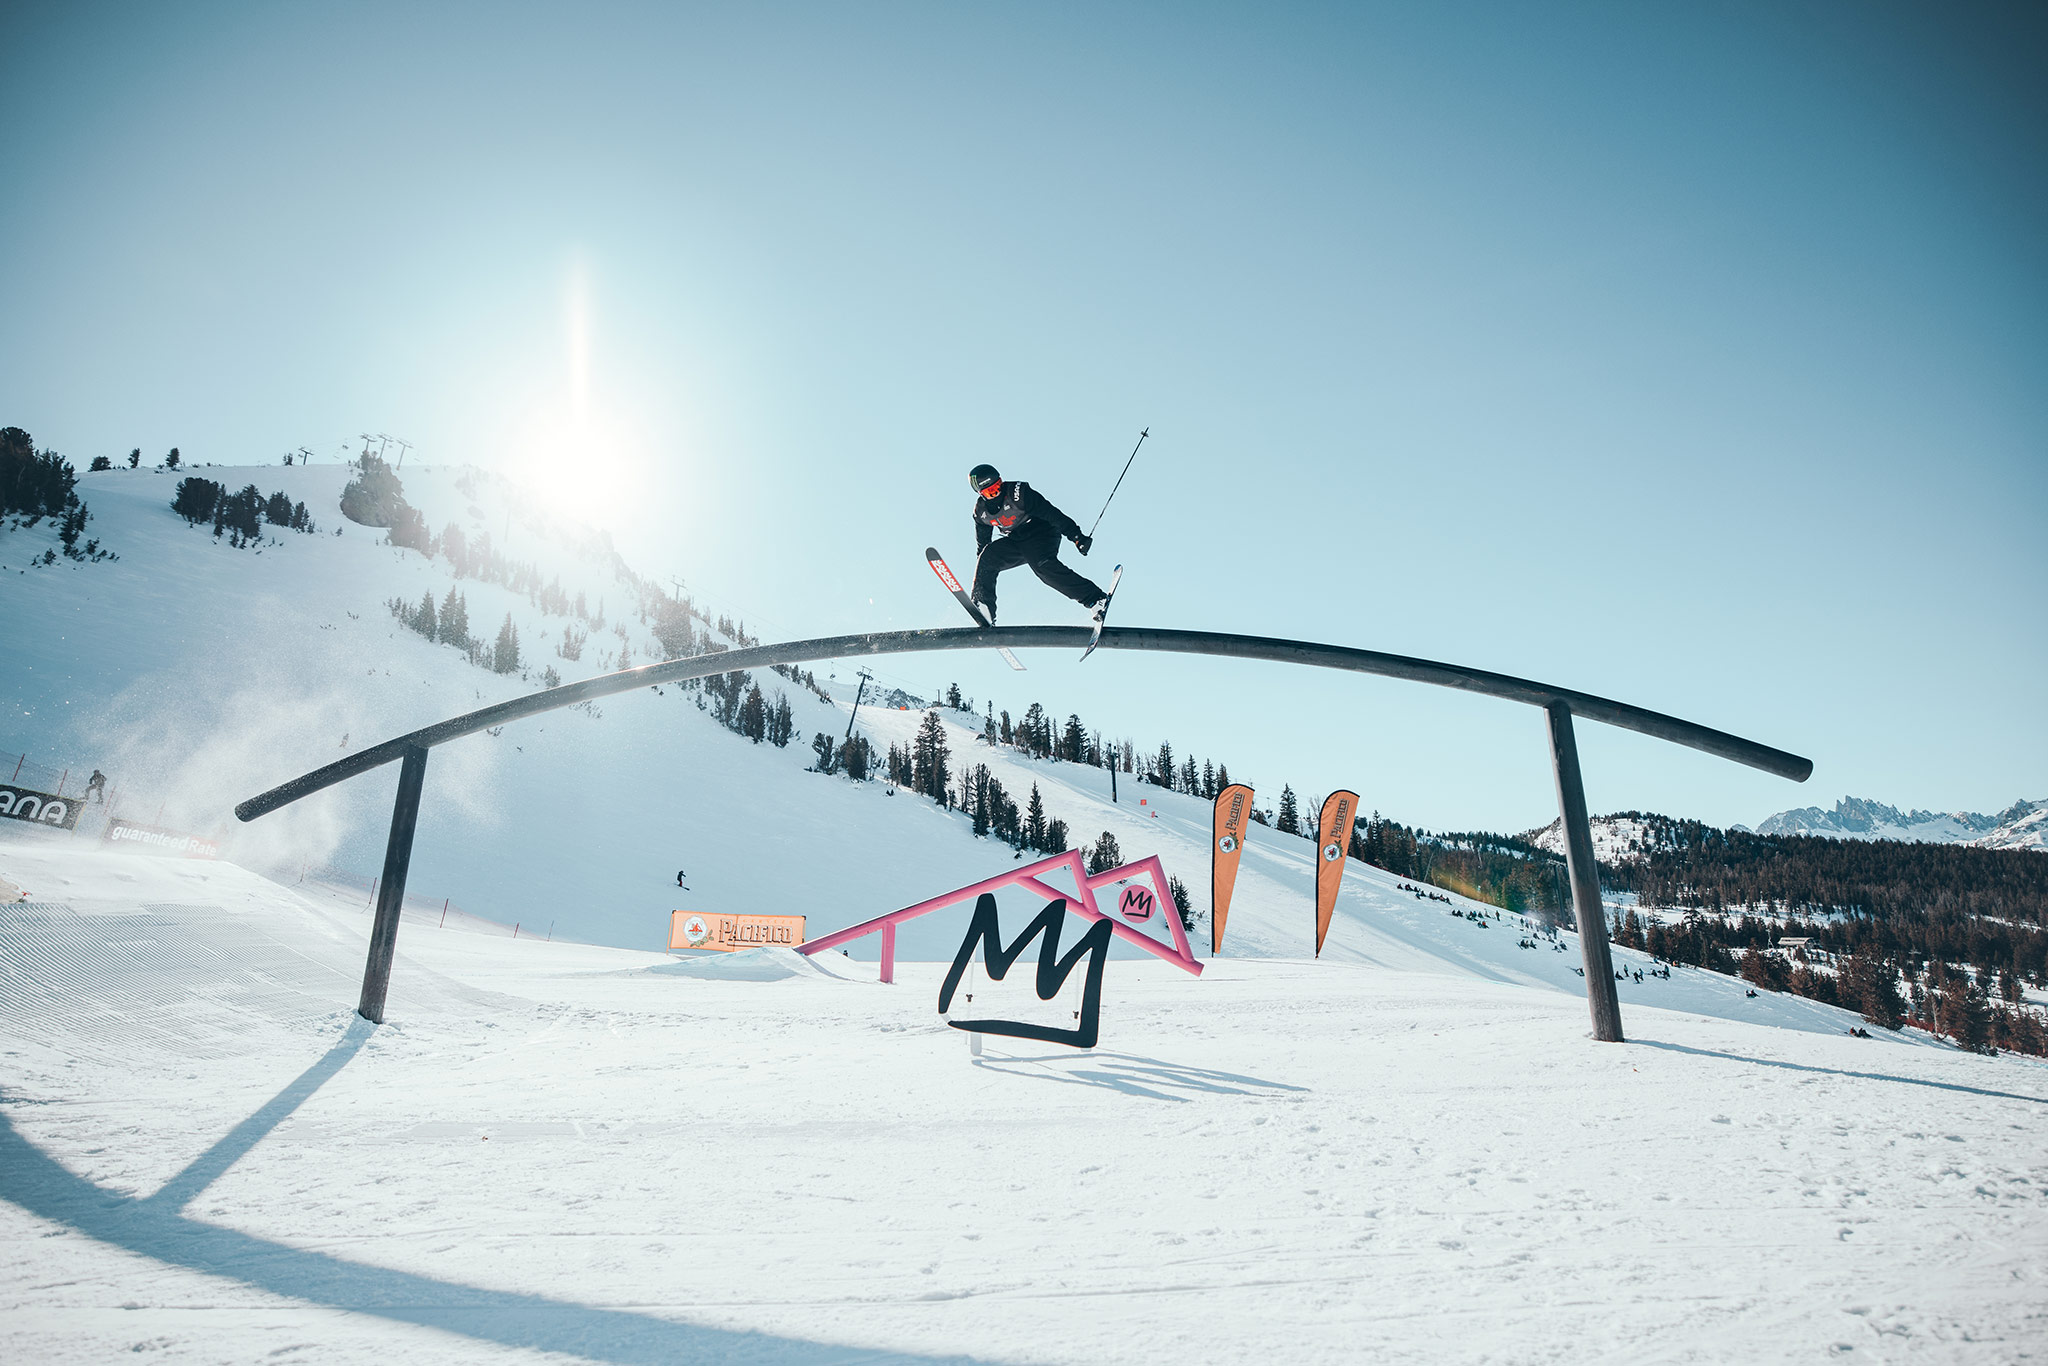 Colby Stevenson at the 2022 US Grand Prix Slopestyle in Mammoth Mountain, California